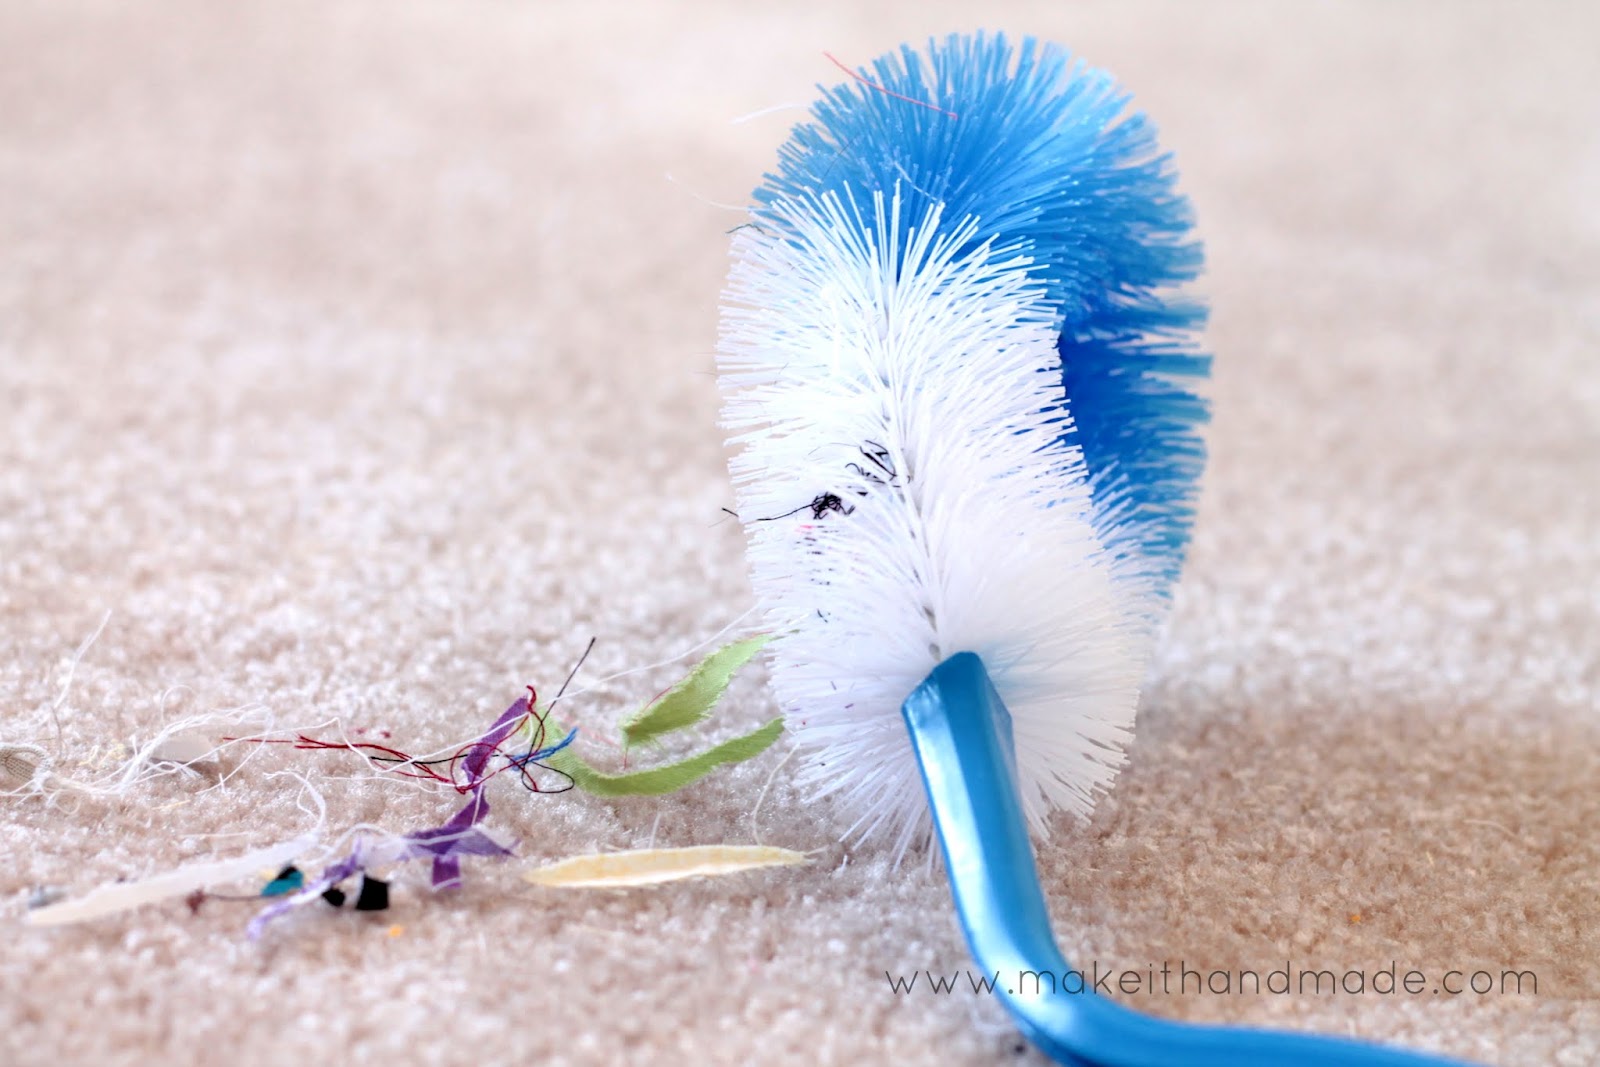 Sewing Quick Tip: Get Rid of Stray Threads With a Toilet Brush